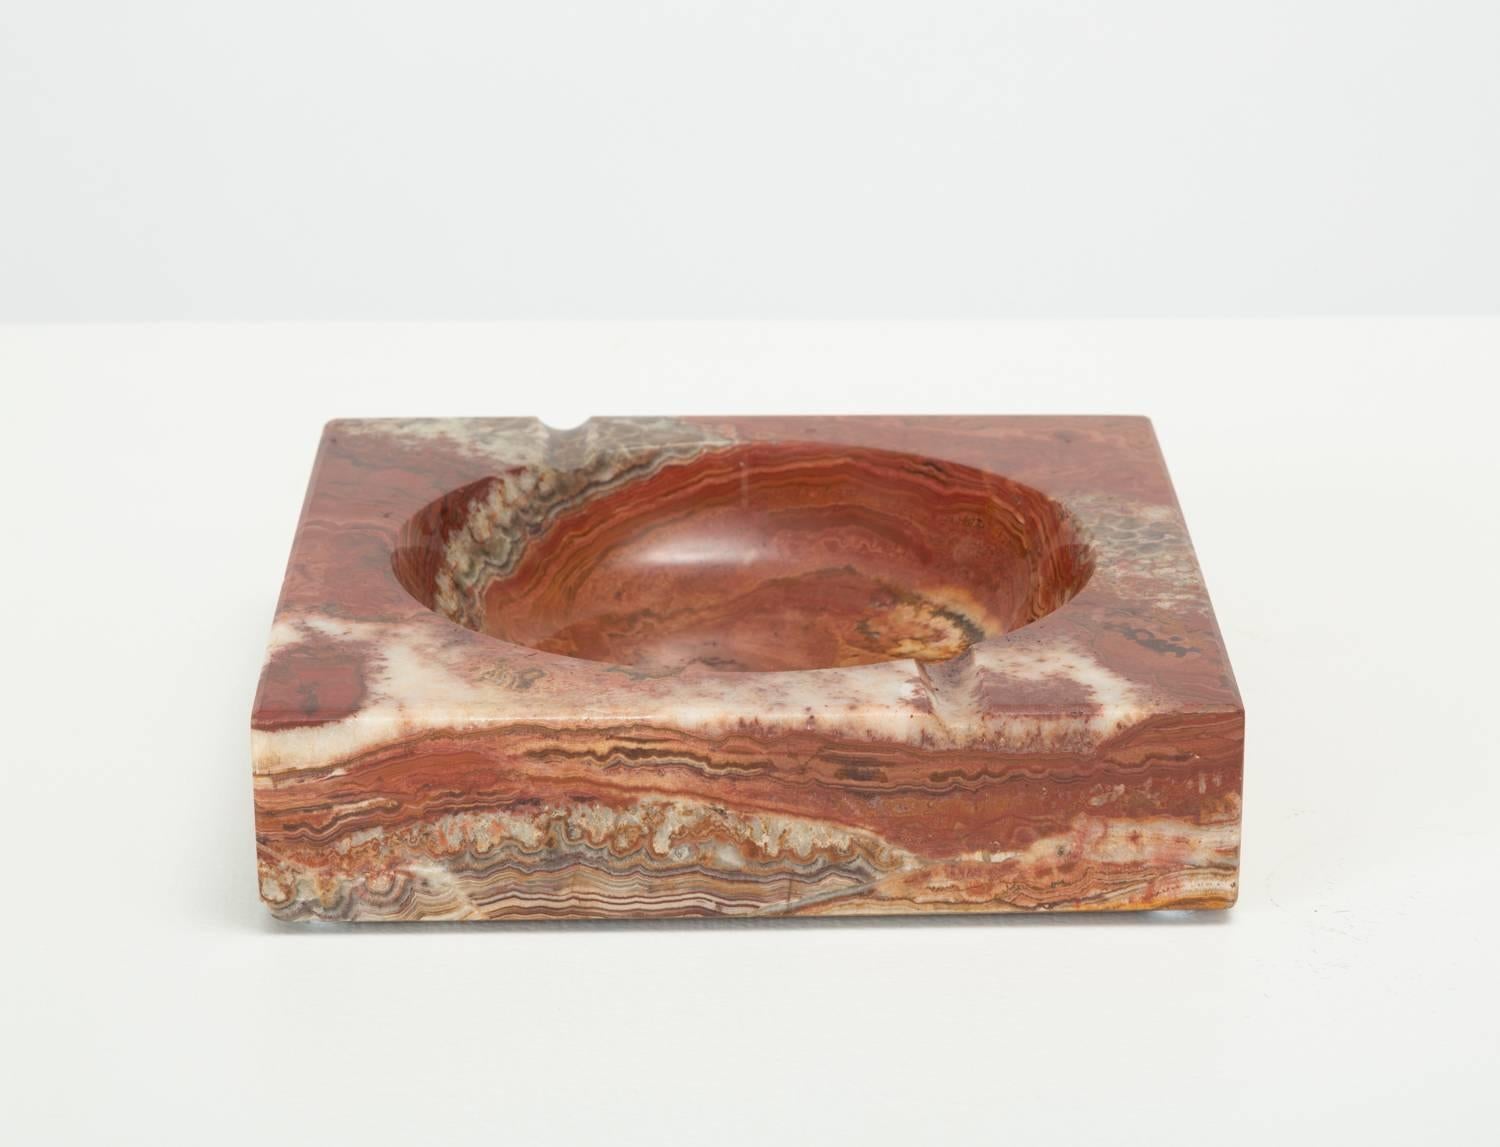 Post-Modern Vintage Square Ashtray in Red Marble